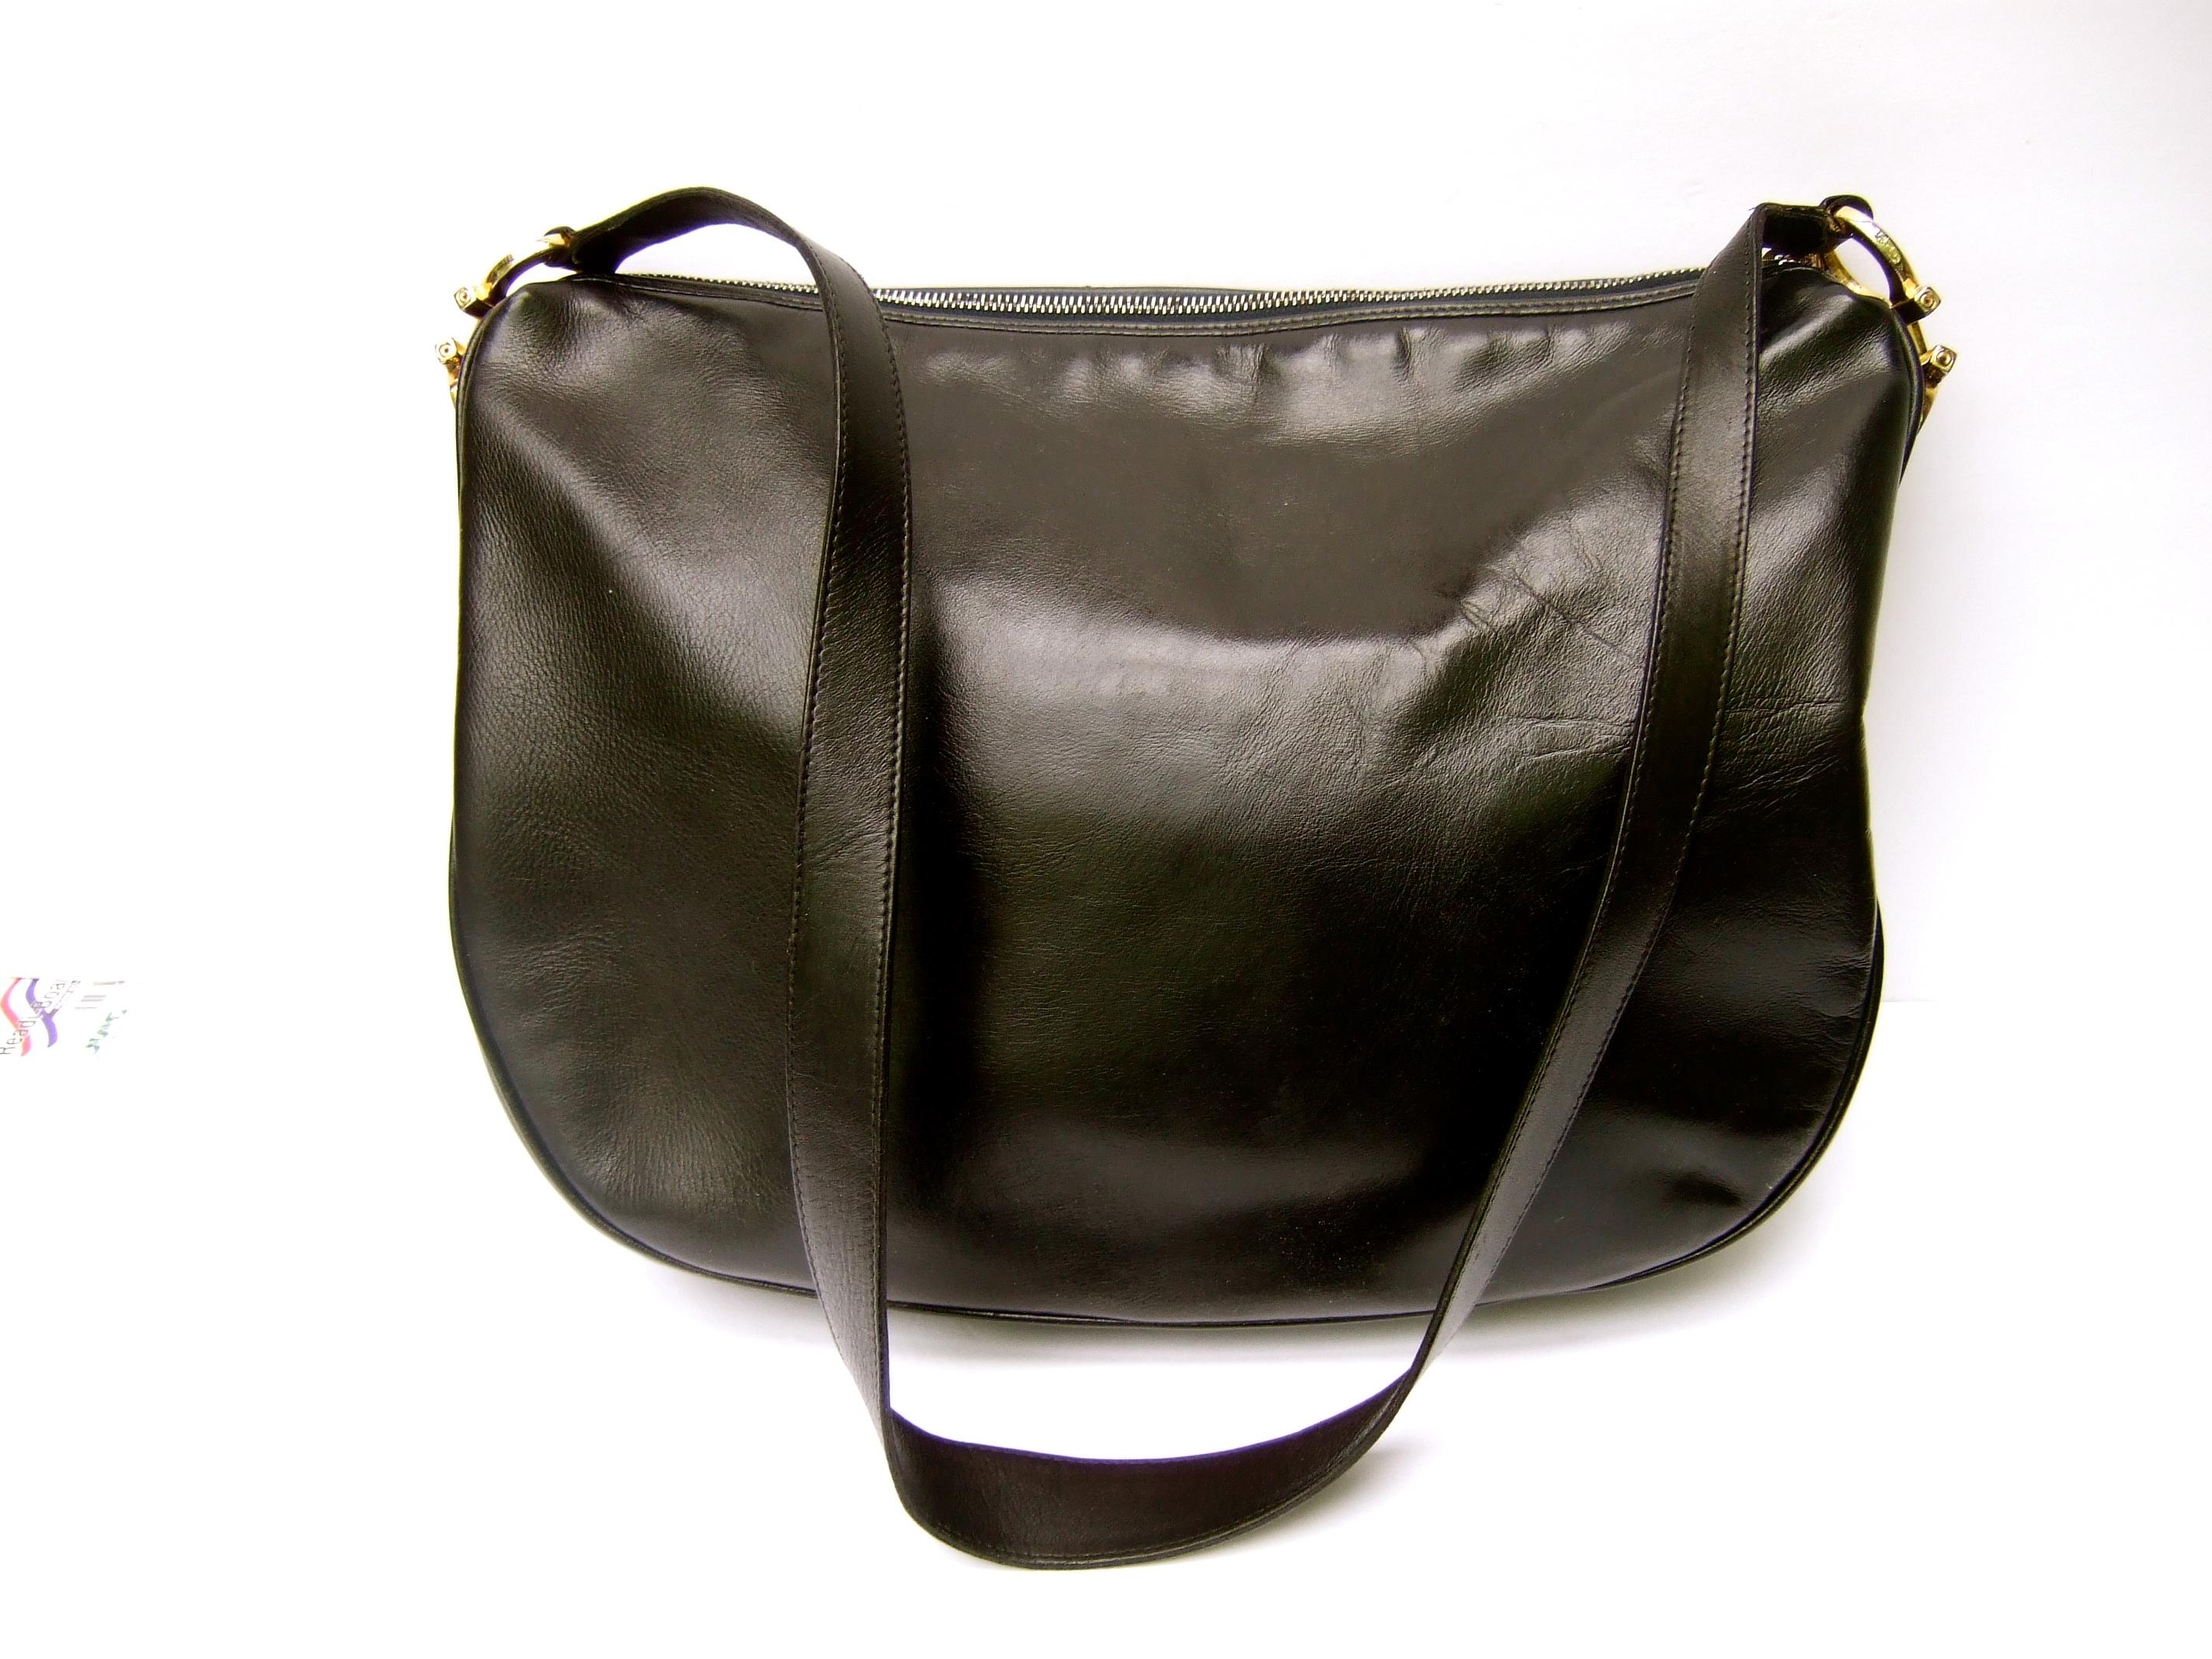 Salvatore Ferragamo Italian black leather shoulder bag c 1990s 
The Italian large scale roomy handbag is covered with smooth black 
leather with a slight sheen. Paired with sleek gilt metal hardware
inscribed Ferragamo 

The handbag zippers across